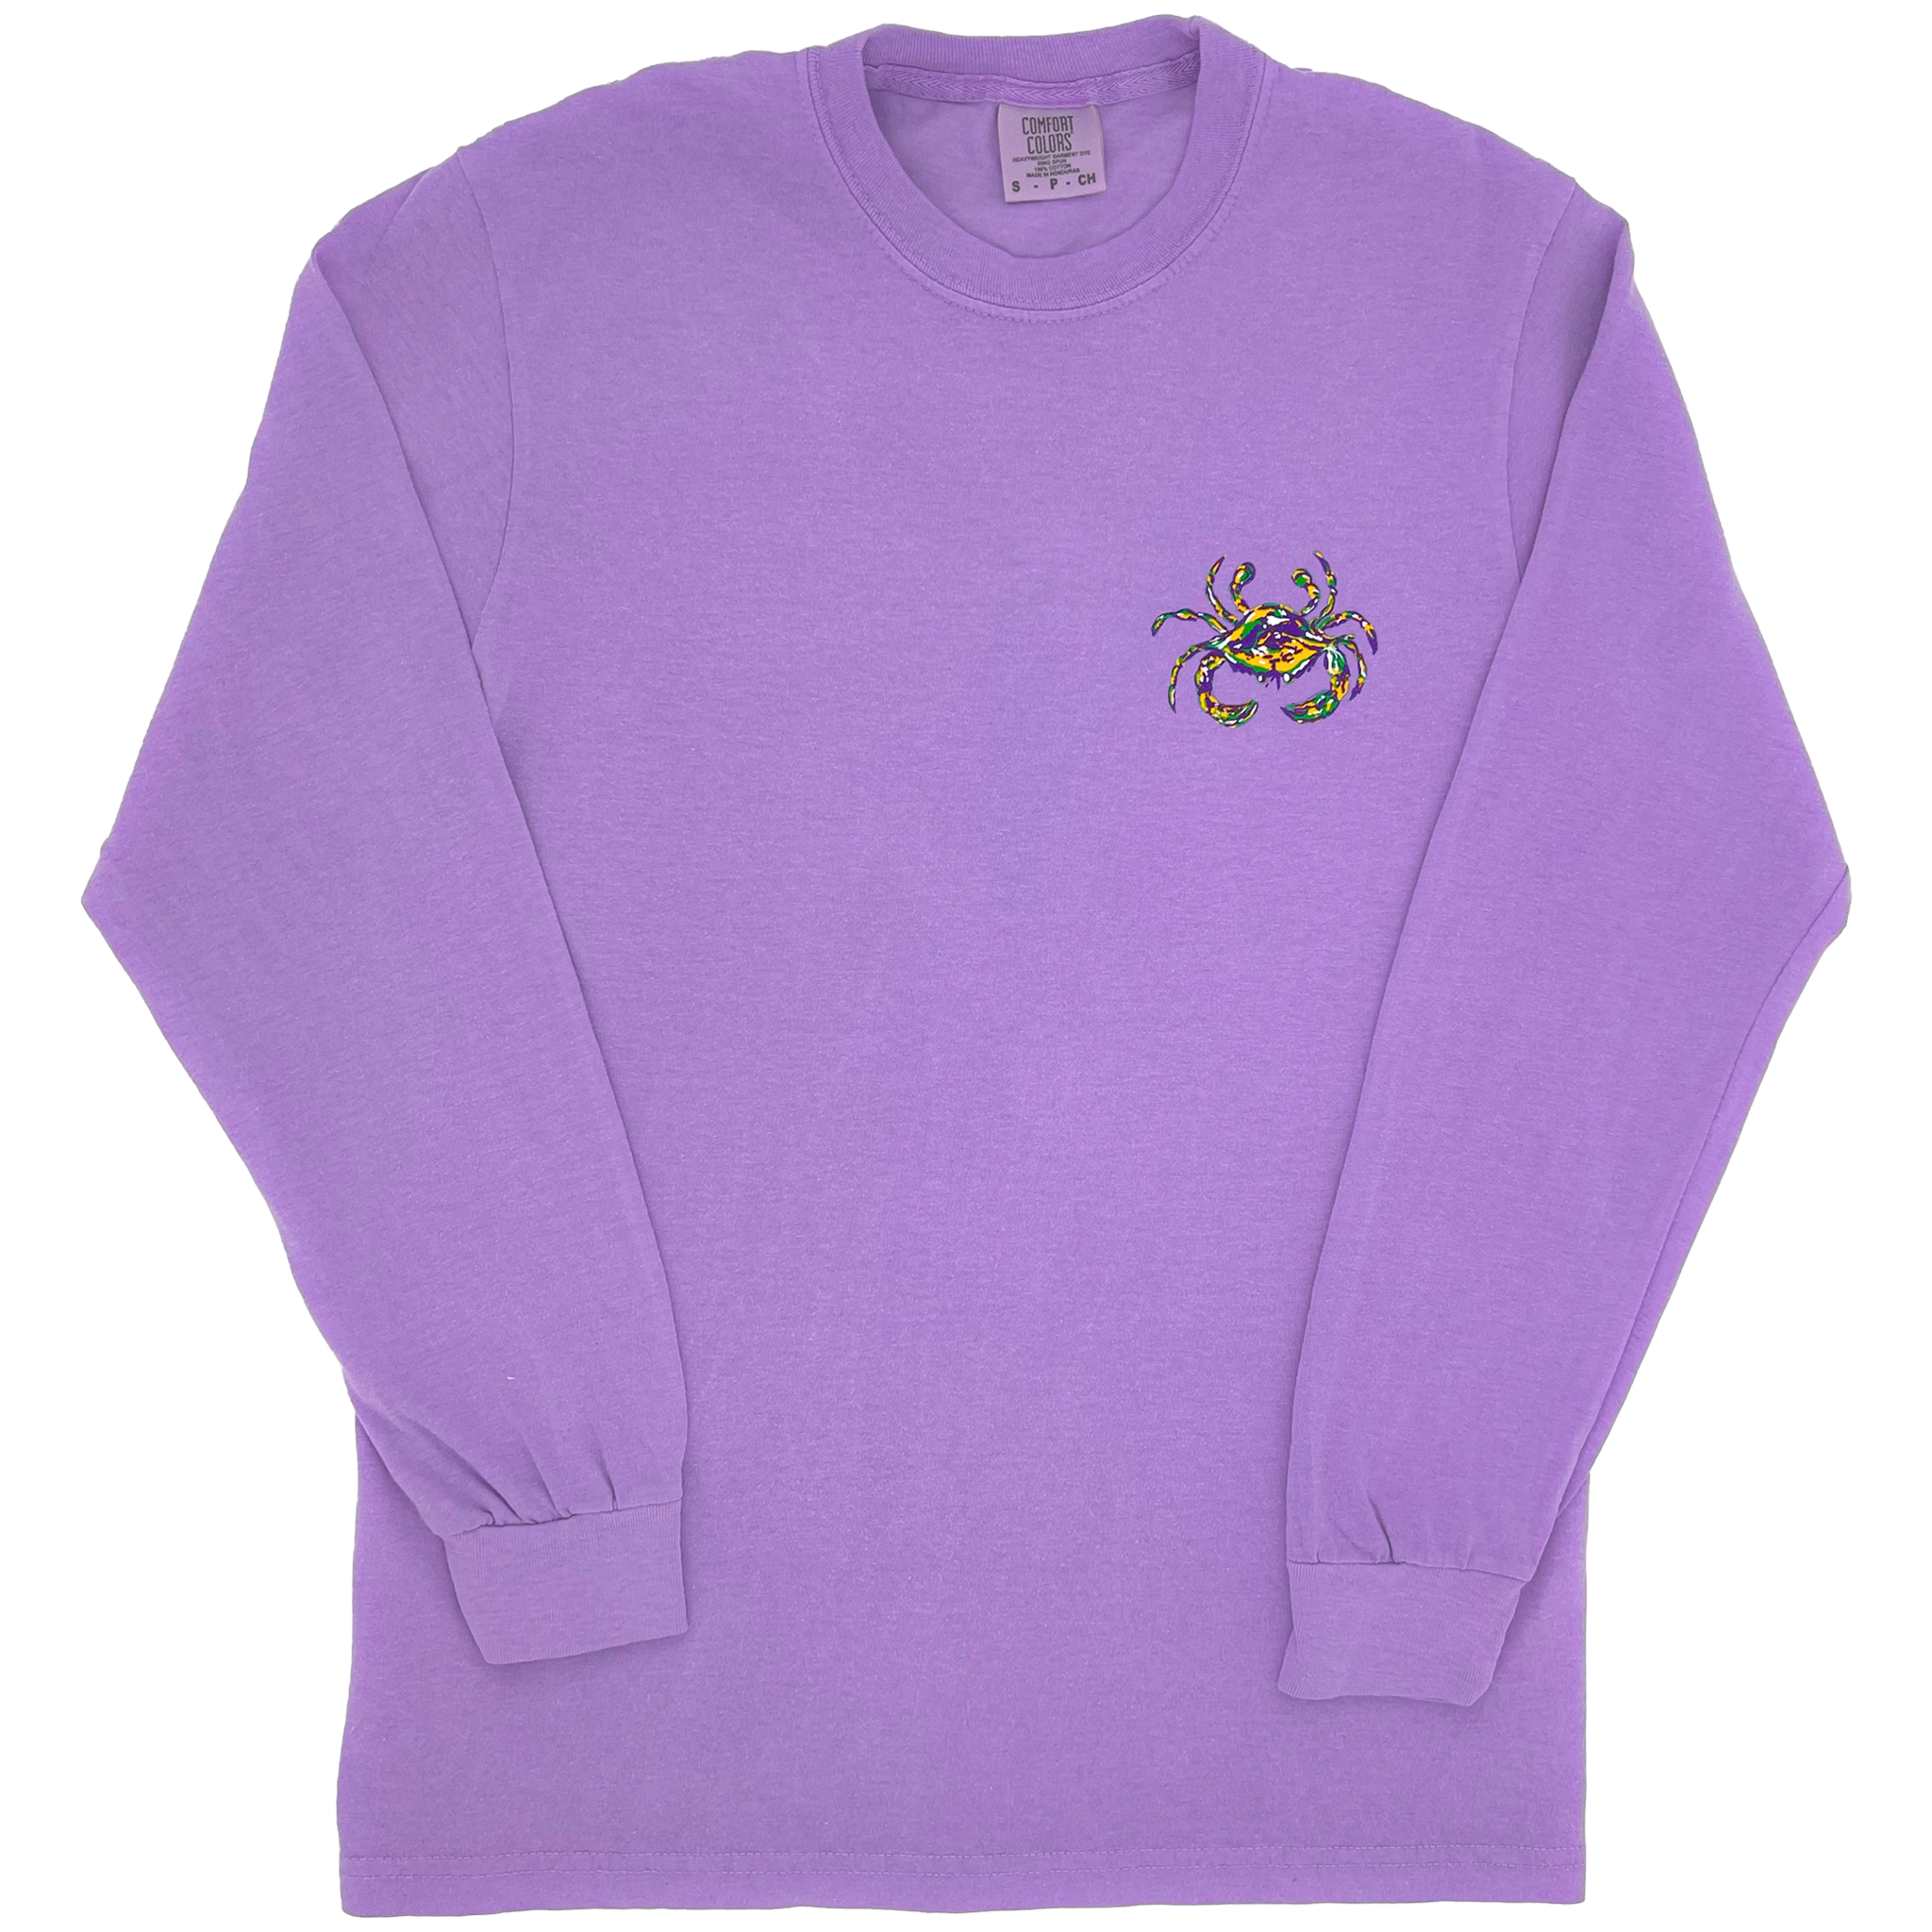 A blue crab in Mardi Gras colors is on the left chest of the bright violet long sleeve t-shirt